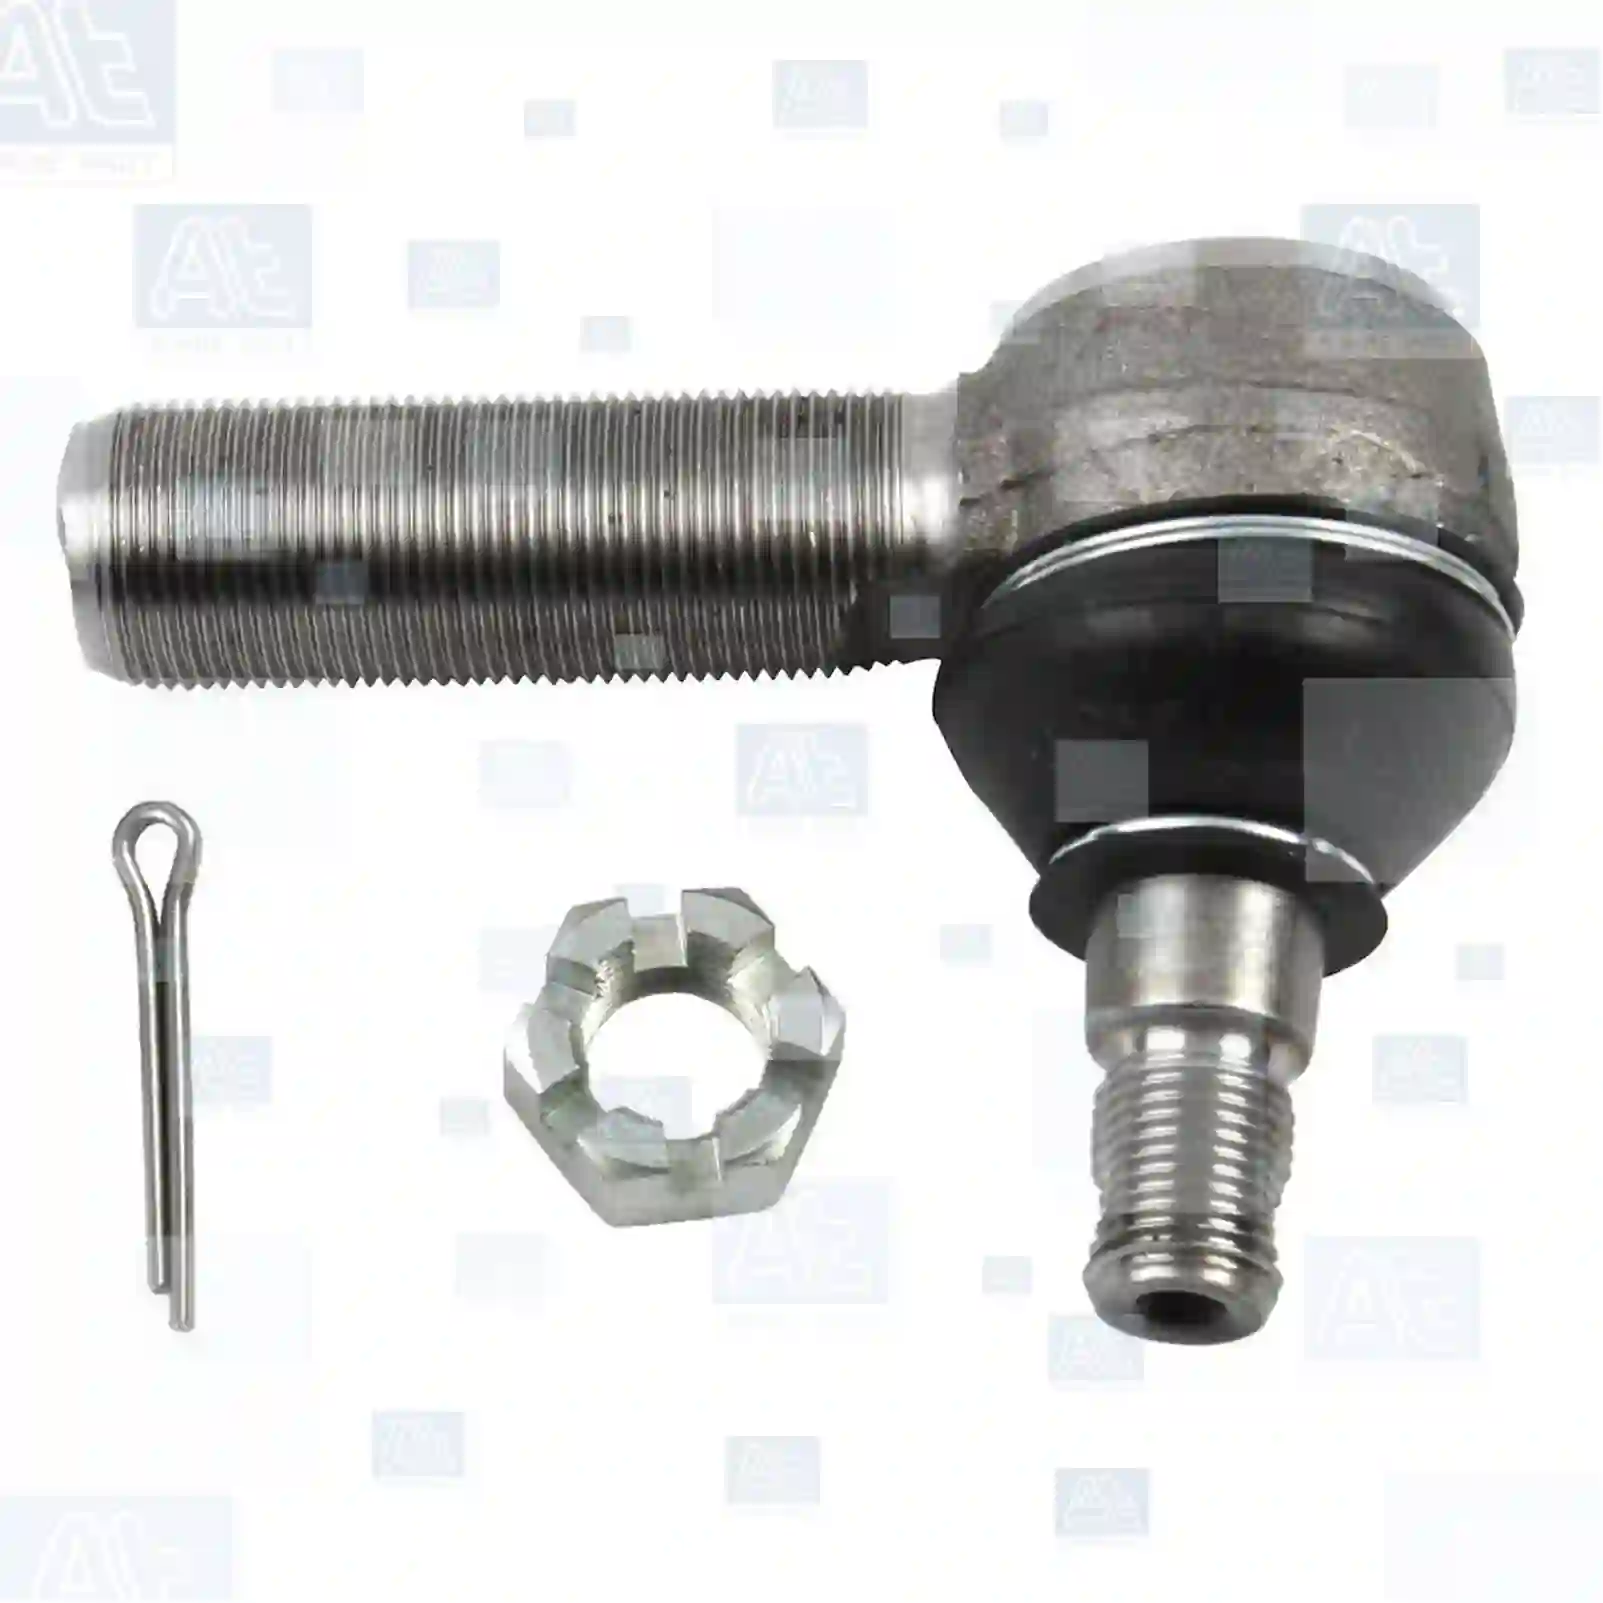 Ball joint, right hand thread, at no 77705350, oem no: 0608530, 608530, 42480024, 42491937, 5021446, 5021448, 6163543, 6792900, 42480024, 42491937, 81953010077, 81953010388, 81953016134, 81953016142, 81953016303, 81953016321, 85400002447, 85400002448, 85400003302, 88953016004, 0003300335, 0003300635, 0003302410, 0003306735, 0003308535, 0003308735, 0003382410, 0003384110, 0004607248, 0004633229, 0013304835, 0024601648, 4603301235, 6313380510, 0003406252, 5000514097, 5000807554, 5000814097, 5001844136, 5001860123, 5001860770, 1190778, 1517449, 1518142, ZG40371-0008 At Spare Part | Engine, Accelerator Pedal, Camshaft, Connecting Rod, Crankcase, Crankshaft, Cylinder Head, Engine Suspension Mountings, Exhaust Manifold, Exhaust Gas Recirculation, Filter Kits, Flywheel Housing, General Overhaul Kits, Engine, Intake Manifold, Oil Cleaner, Oil Cooler, Oil Filter, Oil Pump, Oil Sump, Piston & Liner, Sensor & Switch, Timing Case, Turbocharger, Cooling System, Belt Tensioner, Coolant Filter, Coolant Pipe, Corrosion Prevention Agent, Drive, Expansion Tank, Fan, Intercooler, Monitors & Gauges, Radiator, Thermostat, V-Belt / Timing belt, Water Pump, Fuel System, Electronical Injector Unit, Feed Pump, Fuel Filter, cpl., Fuel Gauge Sender,  Fuel Line, Fuel Pump, Fuel Tank, Injection Line Kit, Injection Pump, Exhaust System, Clutch & Pedal, Gearbox, Propeller Shaft, Axles, Brake System, Hubs & Wheels, Suspension, Leaf Spring, Universal Parts / Accessories, Steering, Electrical System, Cabin Ball joint, right hand thread, at no 77705350, oem no: 0608530, 608530, 42480024, 42491937, 5021446, 5021448, 6163543, 6792900, 42480024, 42491937, 81953010077, 81953010388, 81953016134, 81953016142, 81953016303, 81953016321, 85400002447, 85400002448, 85400003302, 88953016004, 0003300335, 0003300635, 0003302410, 0003306735, 0003308535, 0003308735, 0003382410, 0003384110, 0004607248, 0004633229, 0013304835, 0024601648, 4603301235, 6313380510, 0003406252, 5000514097, 5000807554, 5000814097, 5001844136, 5001860123, 5001860770, 1190778, 1517449, 1518142, ZG40371-0008 At Spare Part | Engine, Accelerator Pedal, Camshaft, Connecting Rod, Crankcase, Crankshaft, Cylinder Head, Engine Suspension Mountings, Exhaust Manifold, Exhaust Gas Recirculation, Filter Kits, Flywheel Housing, General Overhaul Kits, Engine, Intake Manifold, Oil Cleaner, Oil Cooler, Oil Filter, Oil Pump, Oil Sump, Piston & Liner, Sensor & Switch, Timing Case, Turbocharger, Cooling System, Belt Tensioner, Coolant Filter, Coolant Pipe, Corrosion Prevention Agent, Drive, Expansion Tank, Fan, Intercooler, Monitors & Gauges, Radiator, Thermostat, V-Belt / Timing belt, Water Pump, Fuel System, Electronical Injector Unit, Feed Pump, Fuel Filter, cpl., Fuel Gauge Sender,  Fuel Line, Fuel Pump, Fuel Tank, Injection Line Kit, Injection Pump, Exhaust System, Clutch & Pedal, Gearbox, Propeller Shaft, Axles, Brake System, Hubs & Wheels, Suspension, Leaf Spring, Universal Parts / Accessories, Steering, Electrical System, Cabin